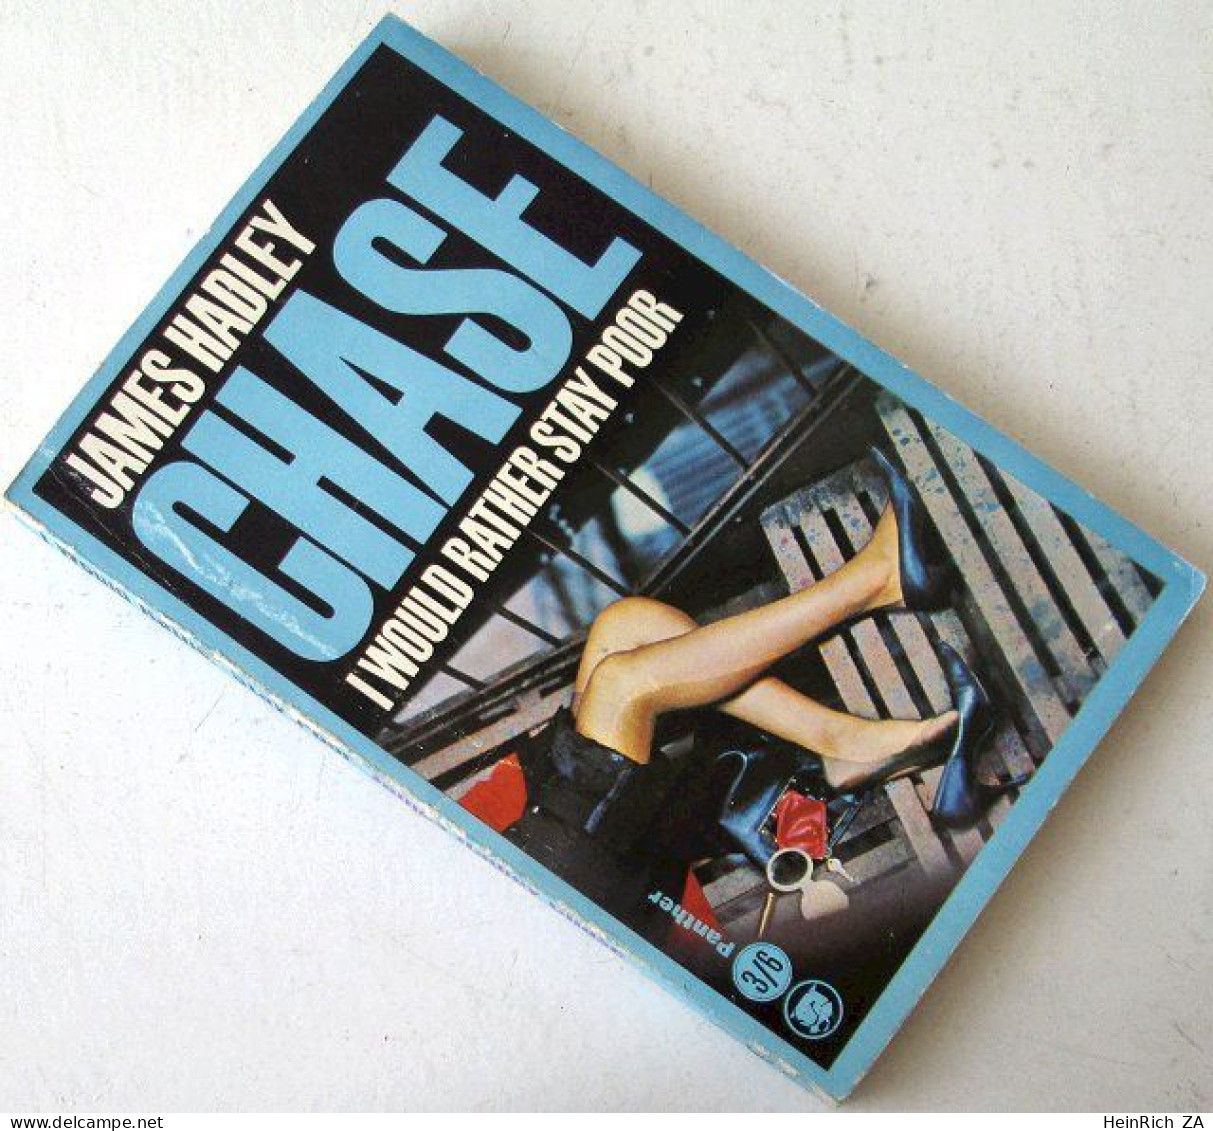 James Hadley Chase - I Would Rather Stay Poor - True Crime